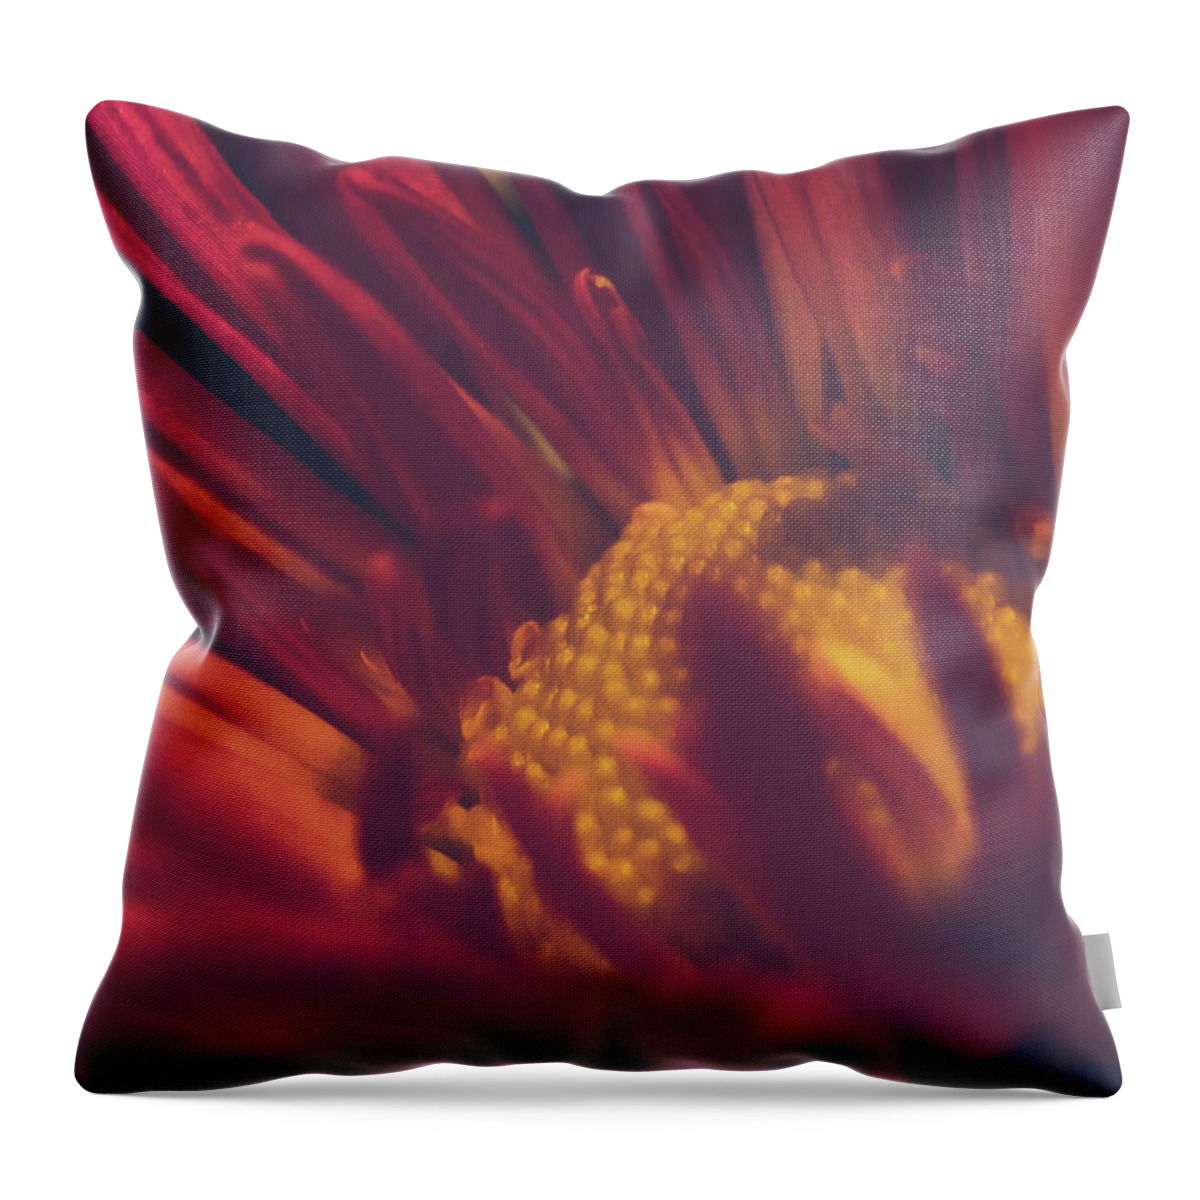 Flower Throw Pillow featuring the pyrography Flower by Anamar Pictures